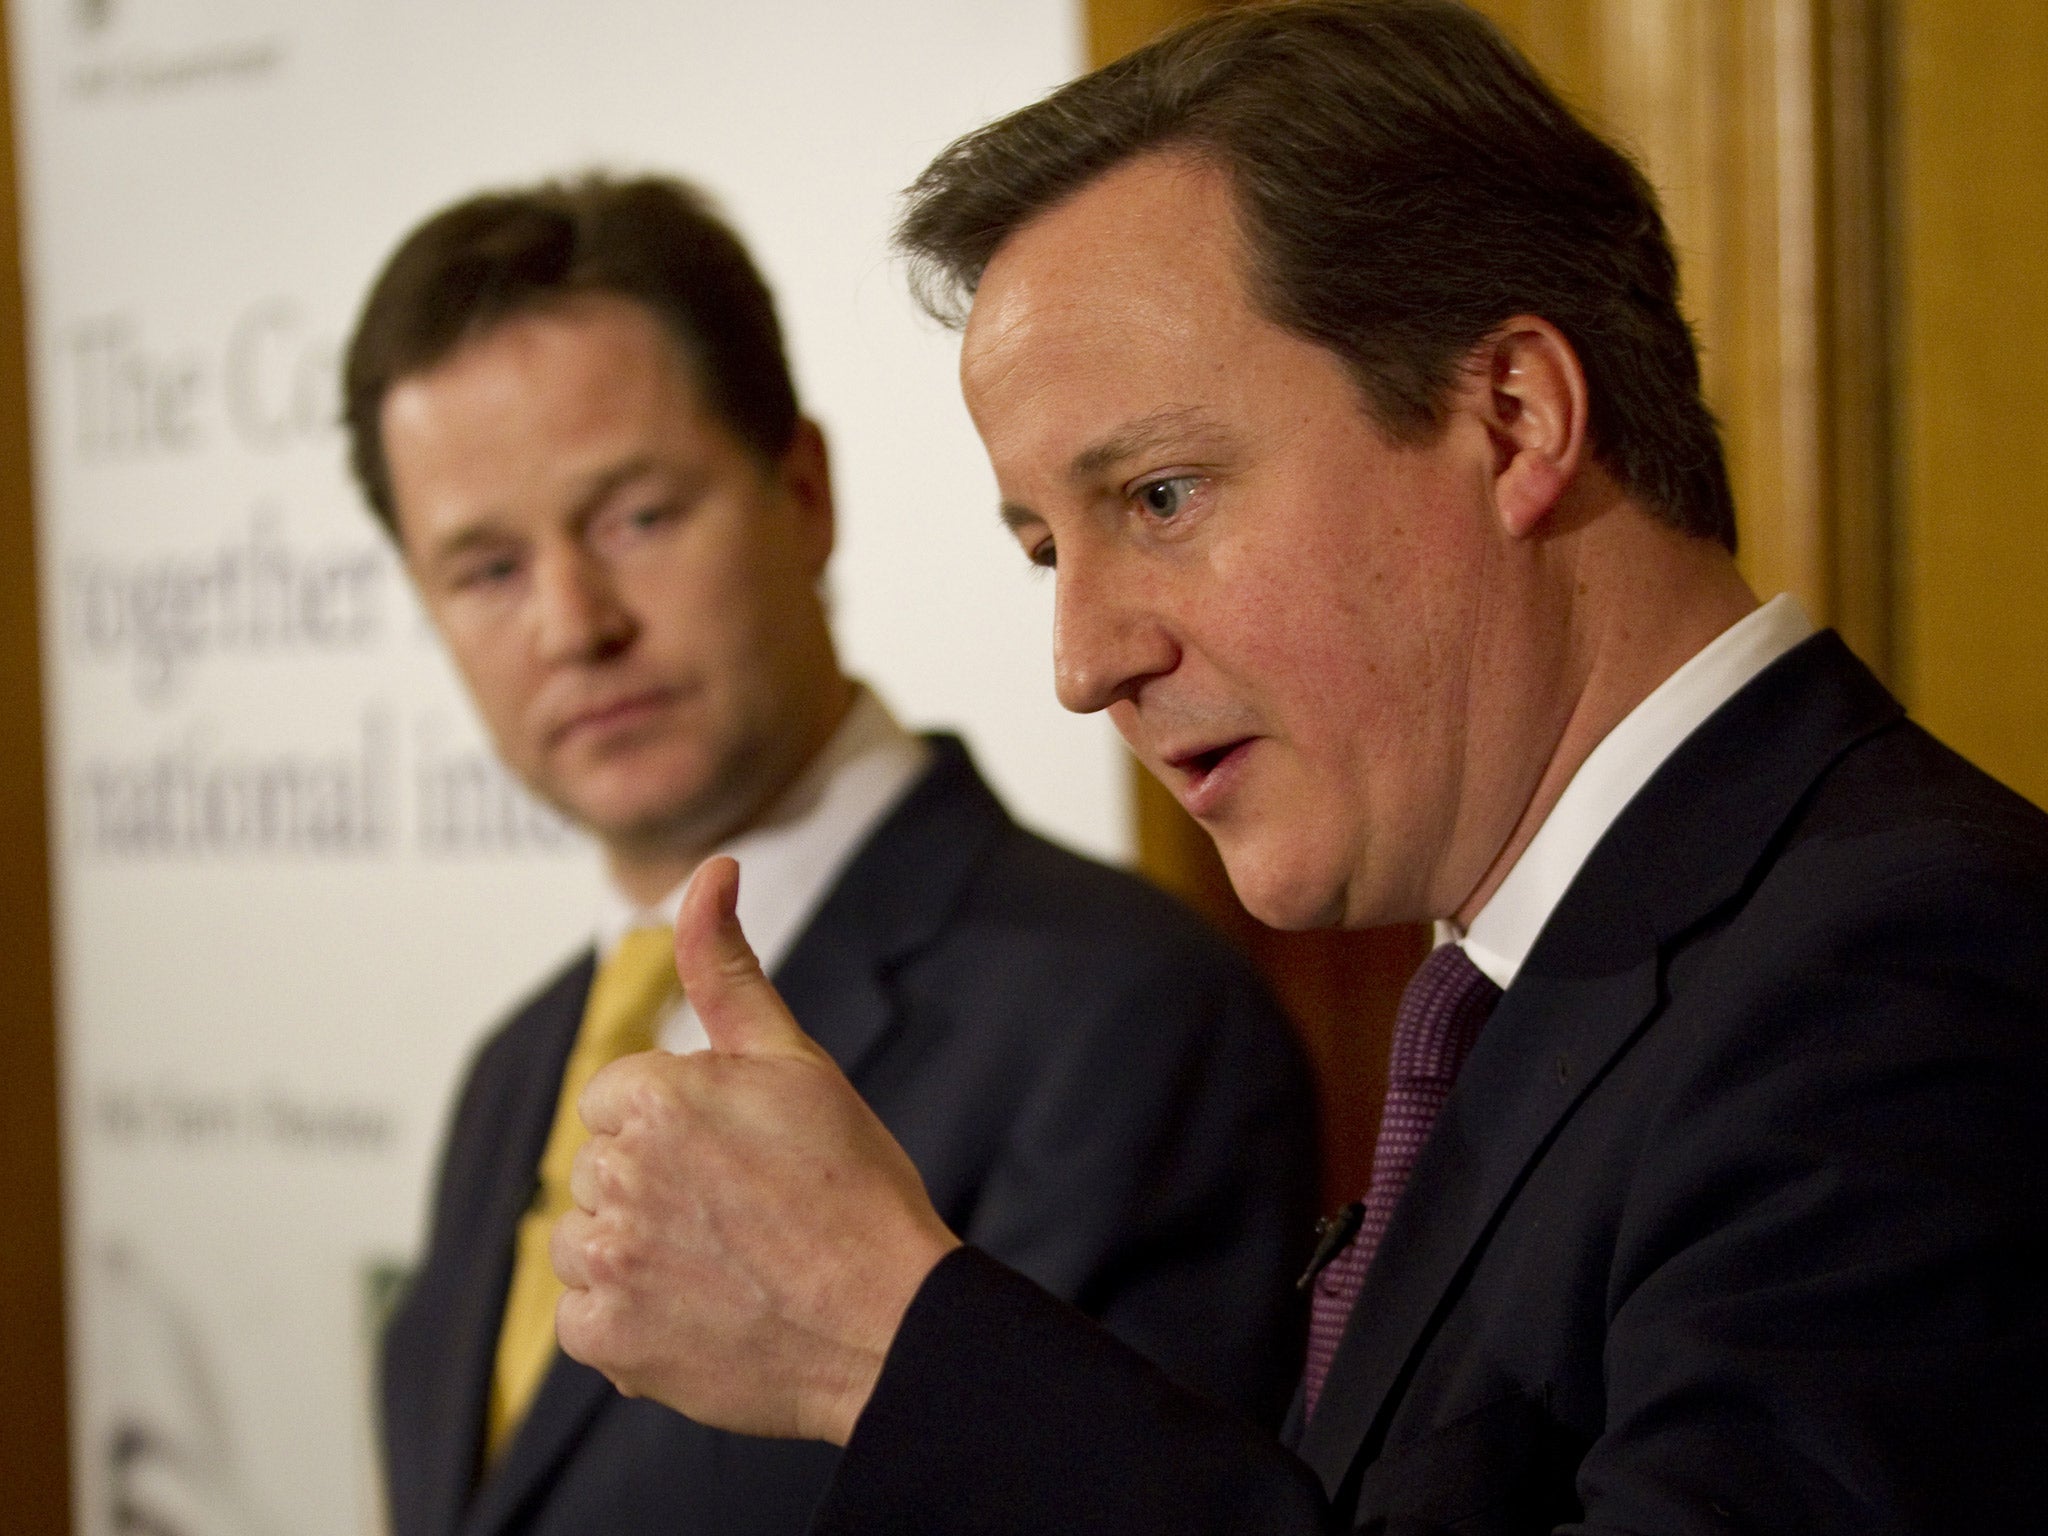 The joint Cameron-Clegg statement will worry some MPs in both coalition parties